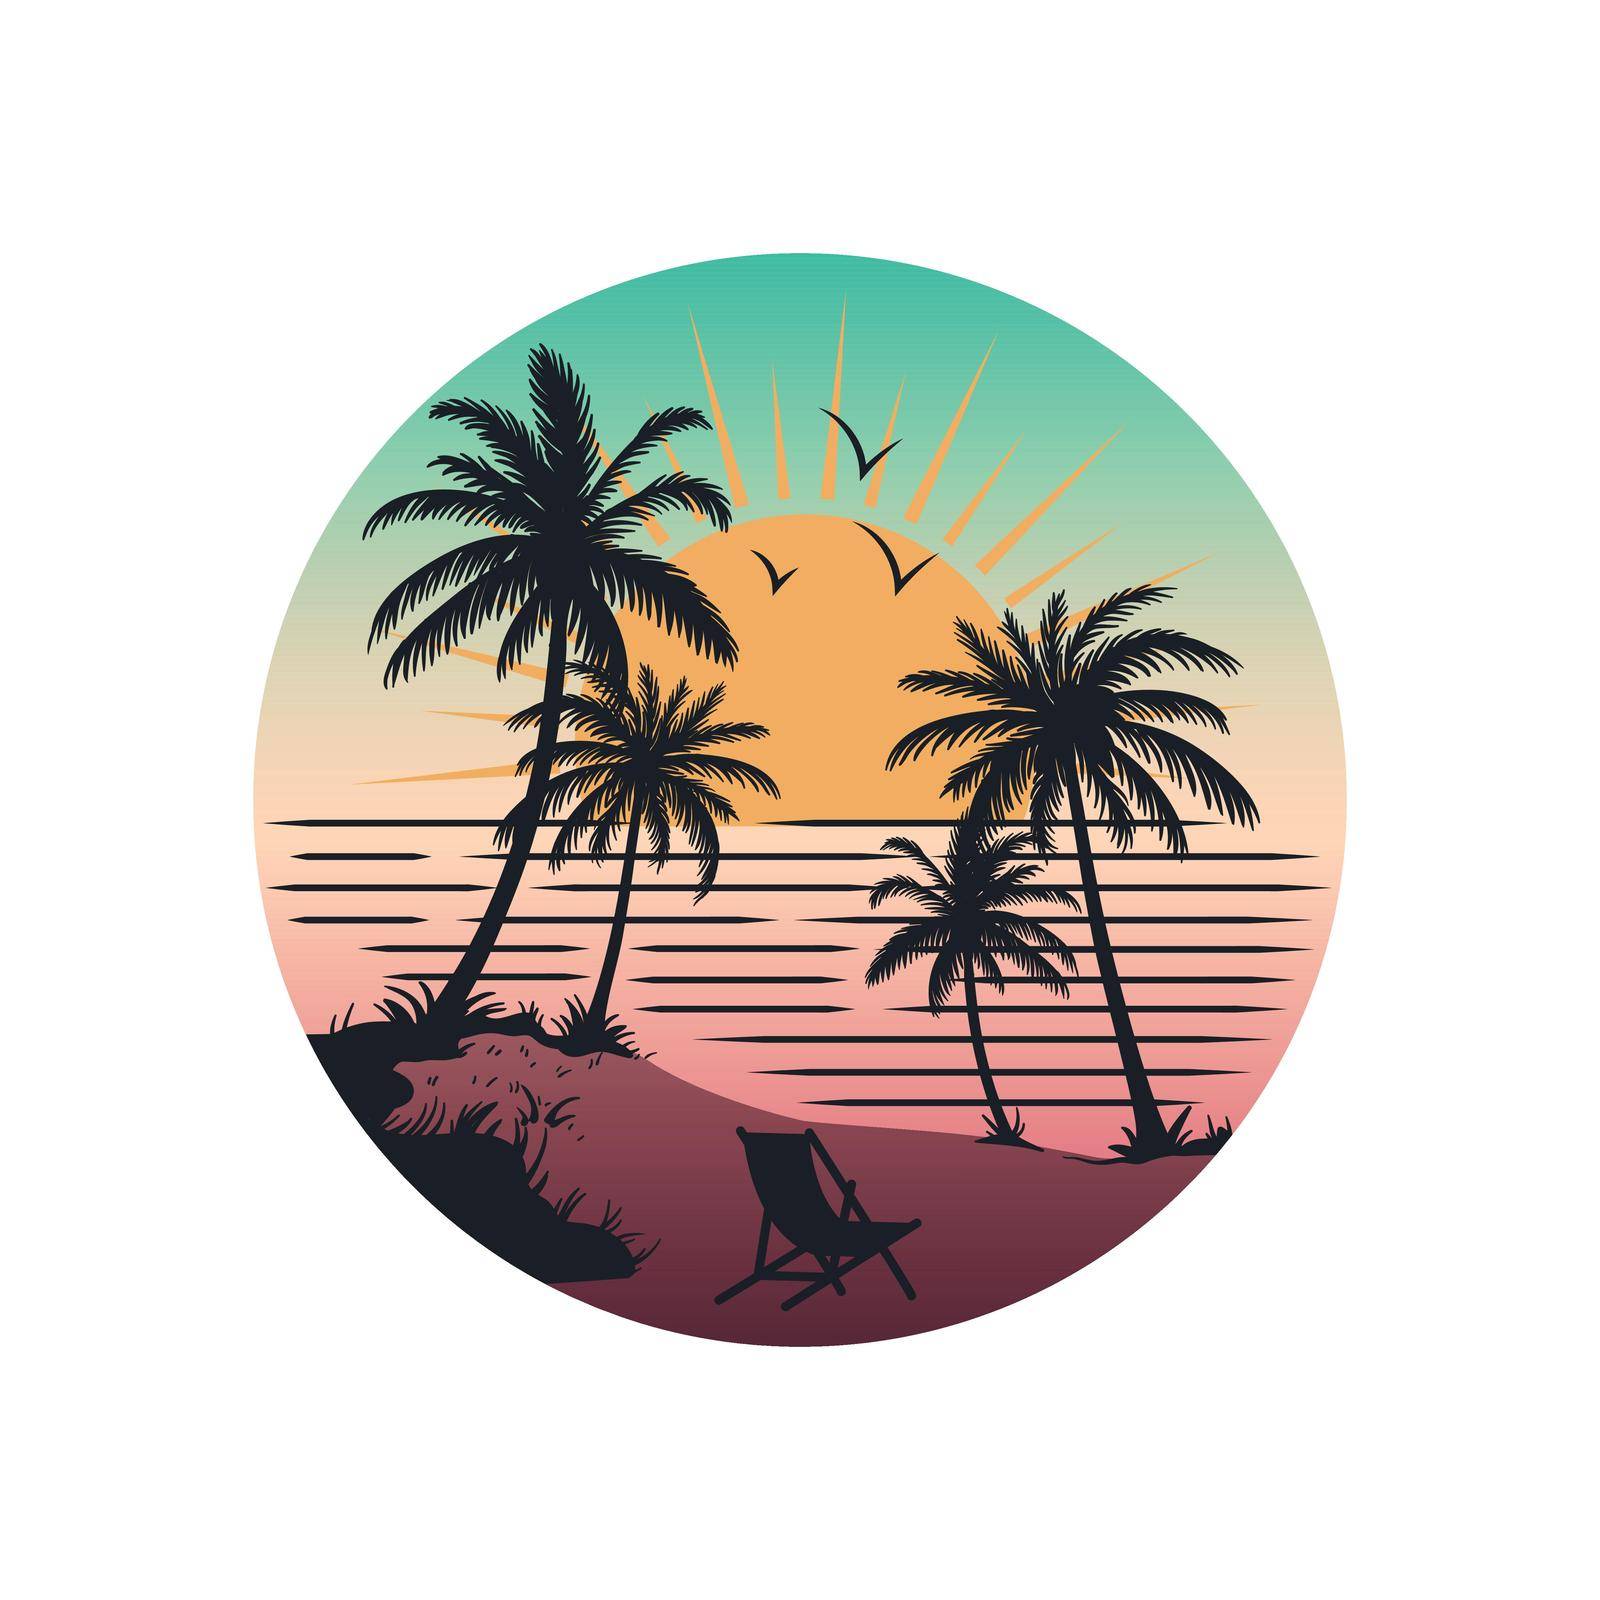 Ocean and beach panorama. Summer time and surfing landscape design artwork. Editable, resizable, EPS 10, vector illustration.
